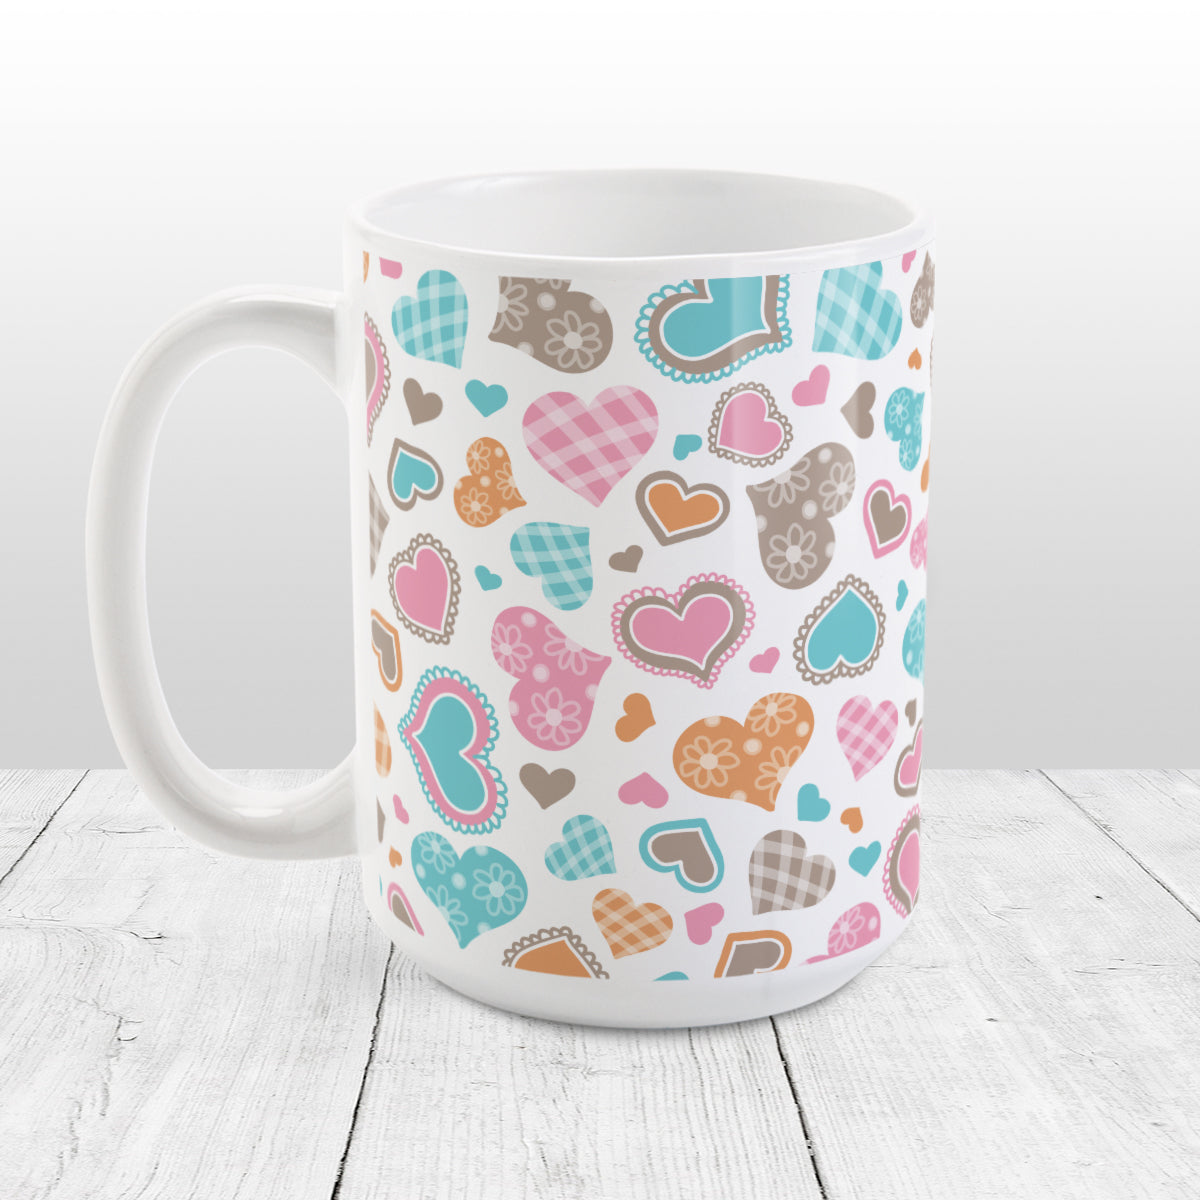 Cutesy Hearts Pattern Mug (15oz) at Amy's Coffee Mugs. This ceramic coffee mug is designed with adorable little hearts in pink, turquoise, orange, and brown. This pattern of cute hearts wraps around the mug to the handle.